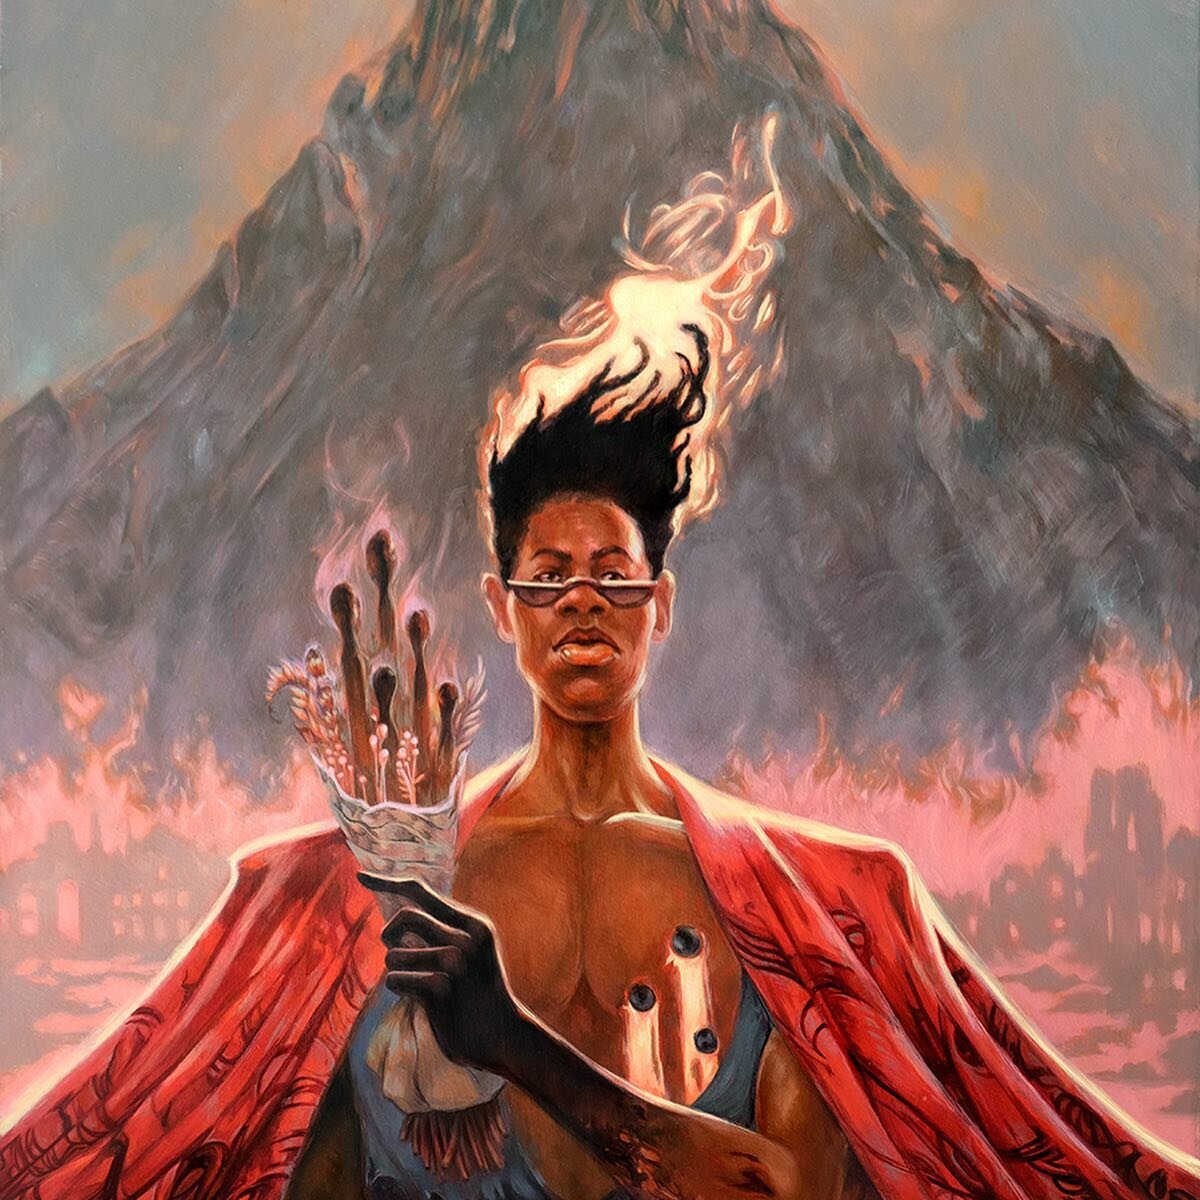 The Volcano is a new painting that I started last year while contemplating the power of Black rage. So often we can hold onto a festering ball of debilitating anger. But I always remind myself that we as a people have always had the power to transfor